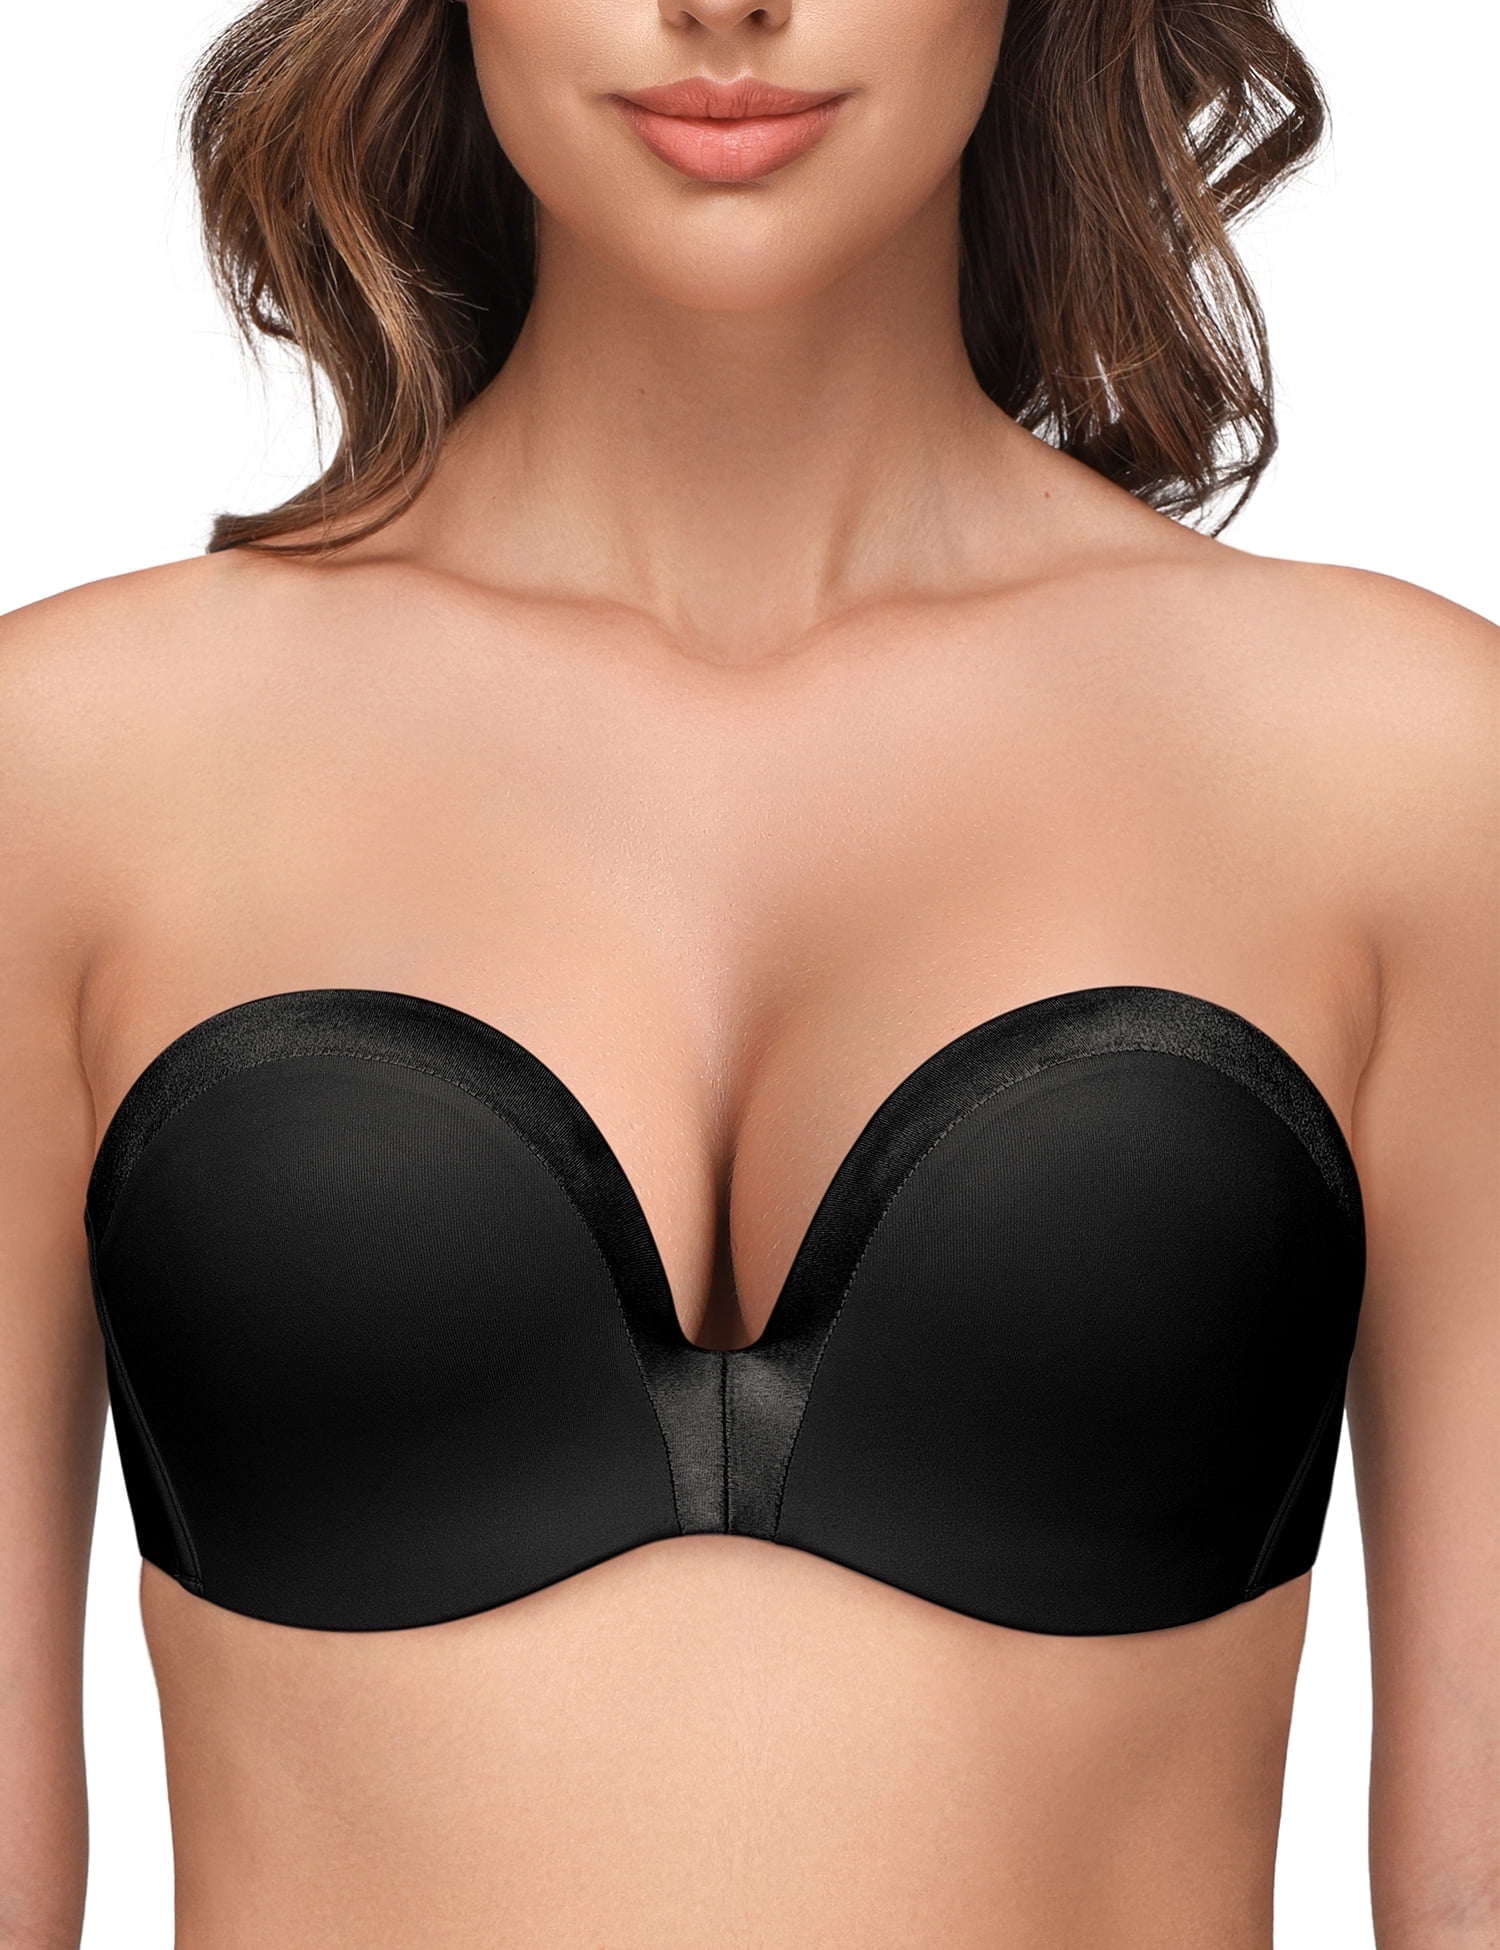 Volwco Plus Size Invisible Bra For C/D/E/F Cup, Strapless Push Up